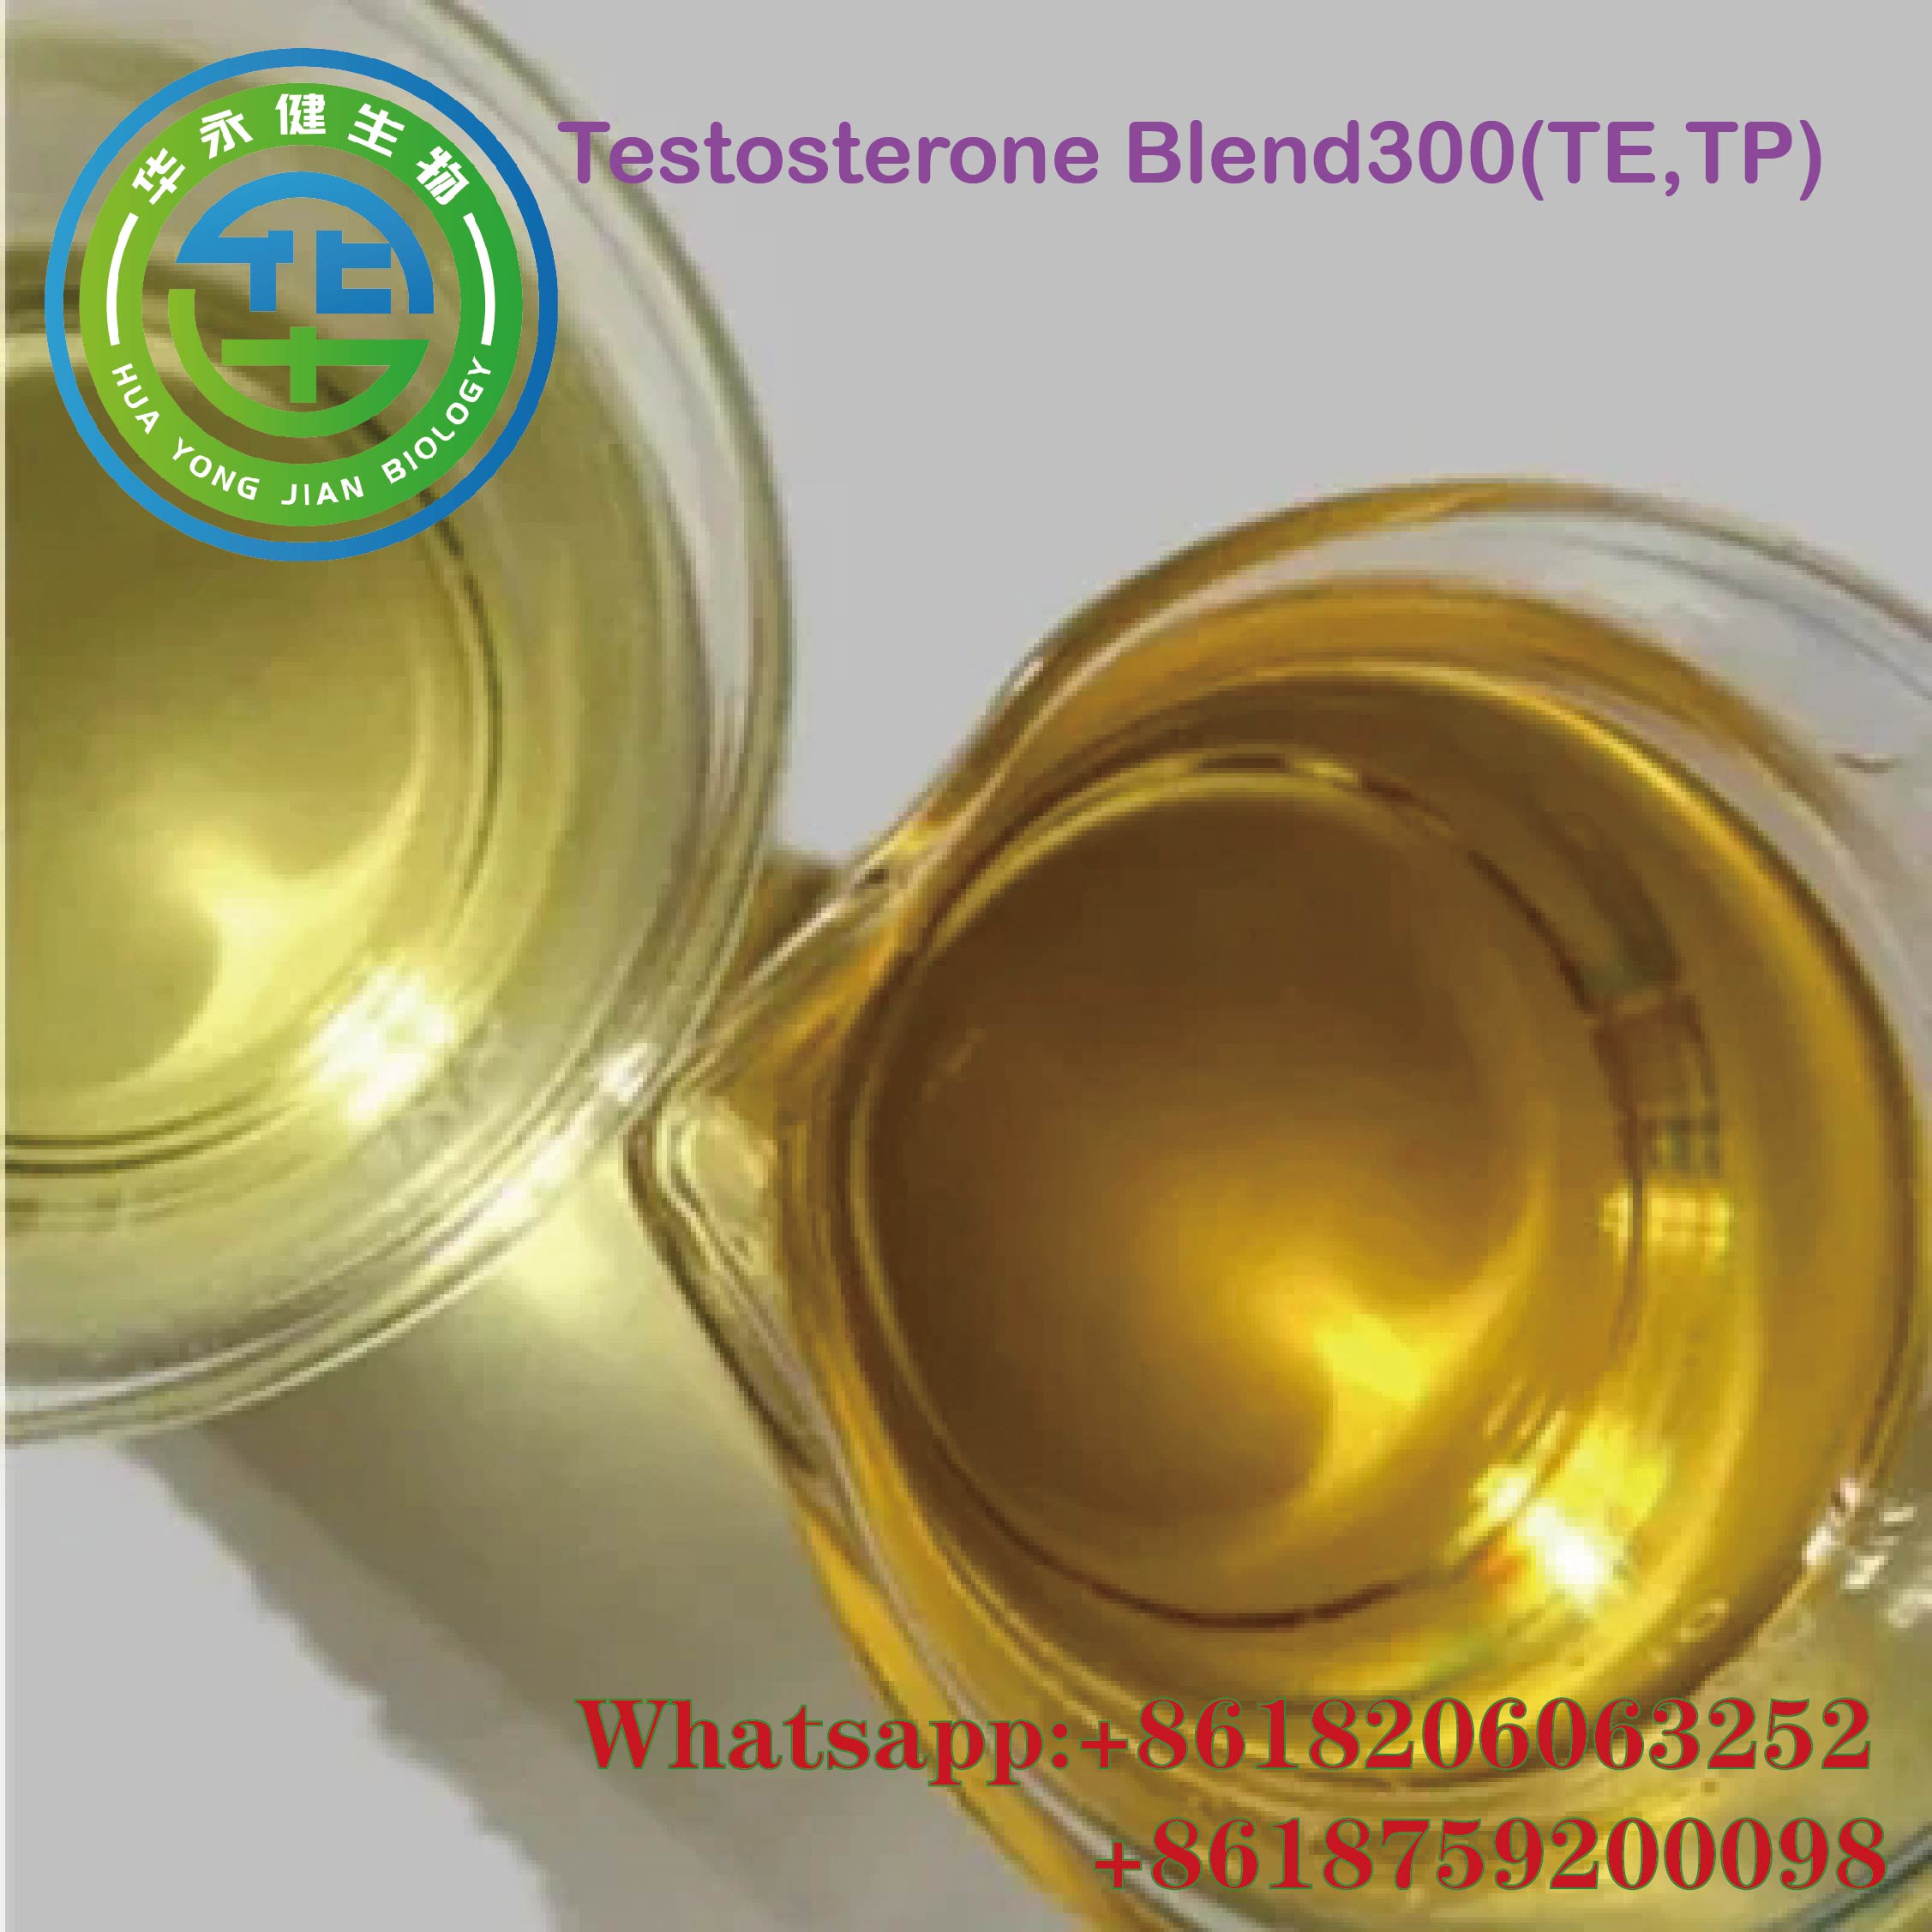 Wholesale Price Top Purity Testosterone Blend300 Hormone Oil 300mg/ml Finished Steroids Semi Finished Oil 100ml/Bottle 